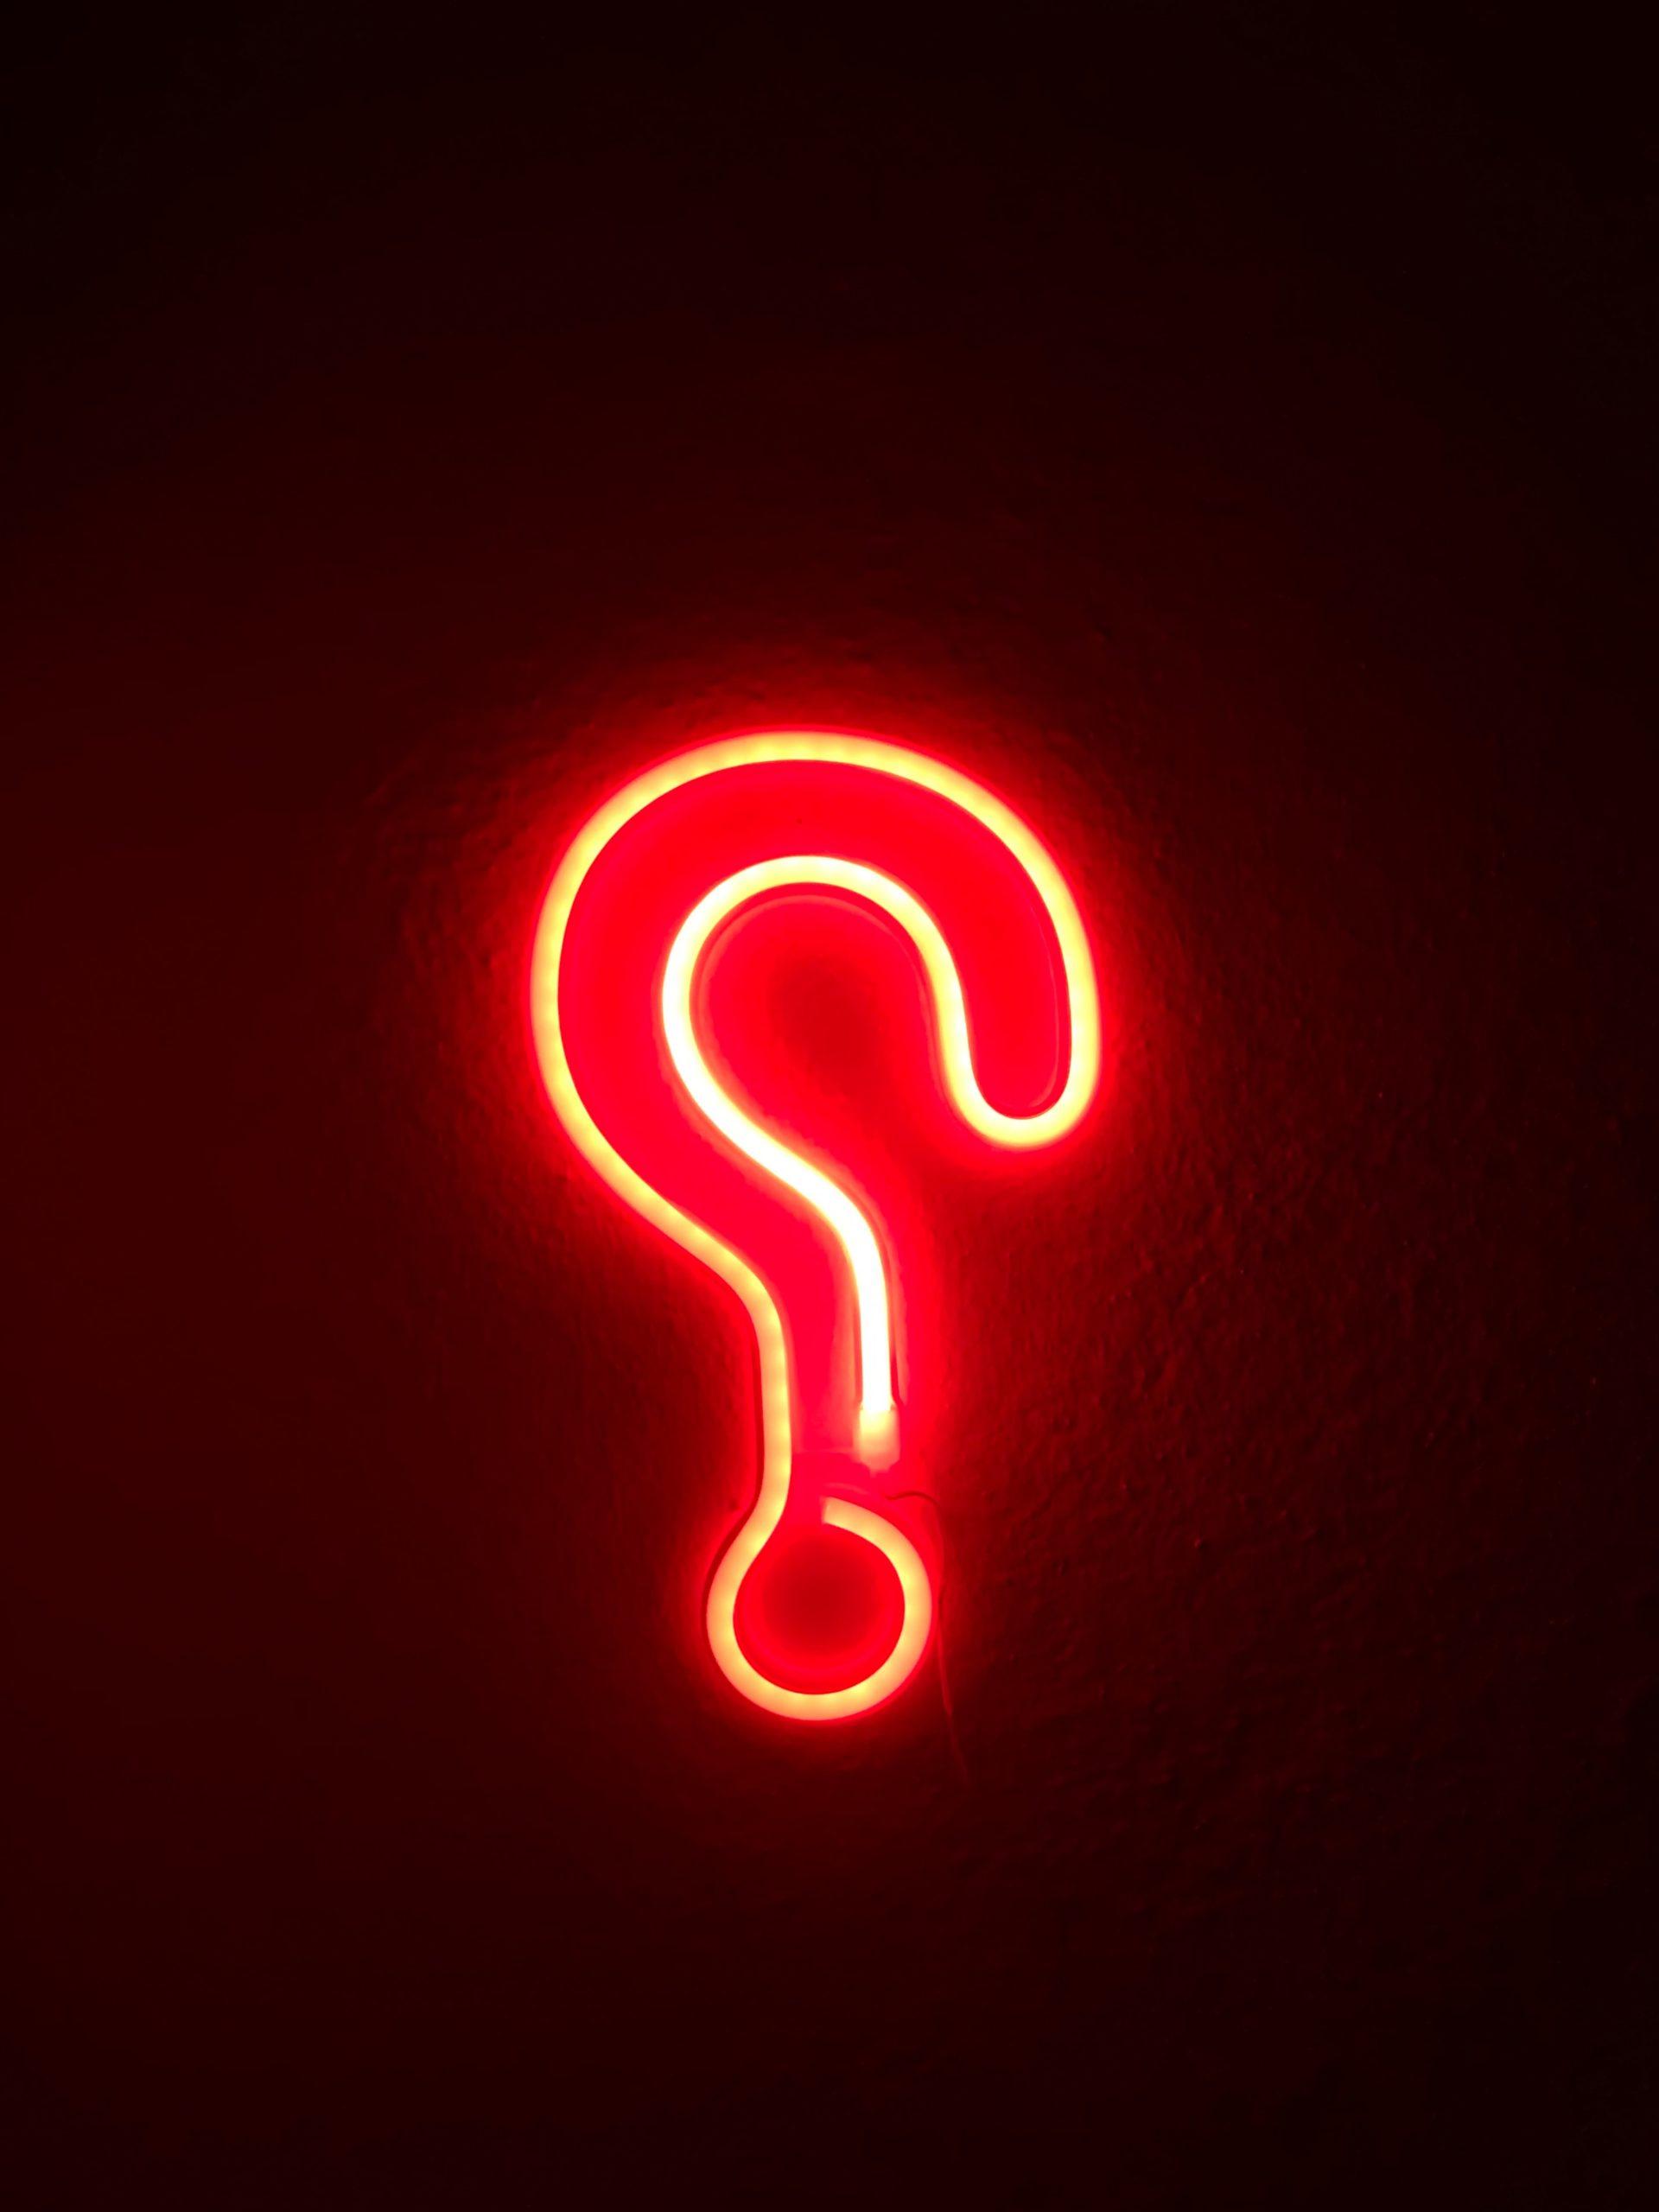 A red neon sign shaped as a question mark against a dark wall